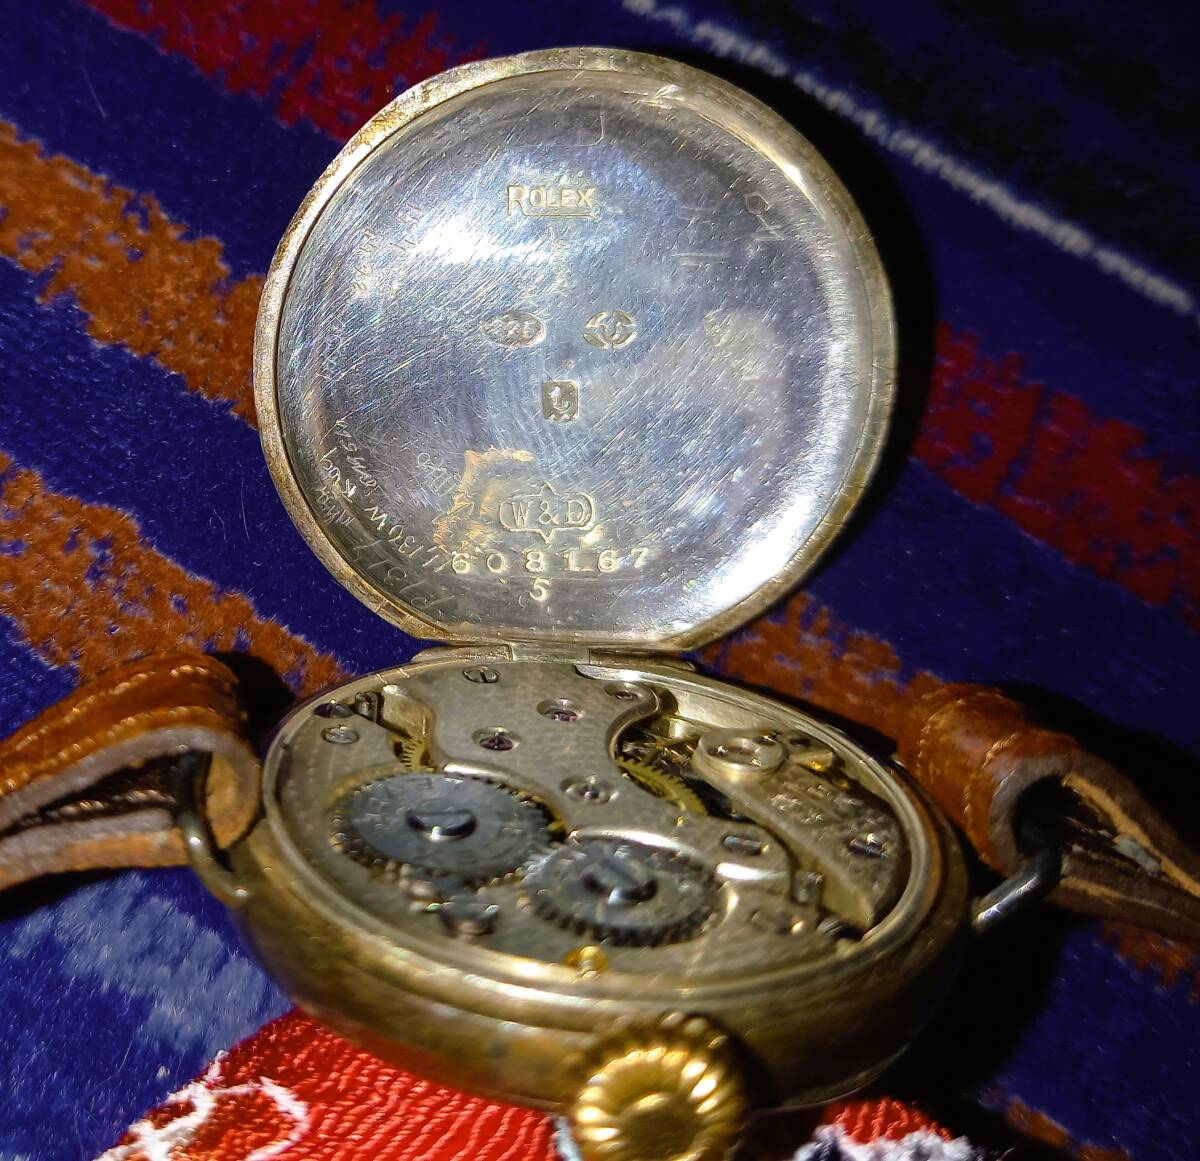 ROLEX low Rex W&D( virus dollar f&tei screw ) old wristwatch.! rare! rare article!100 year close front. thing! operation!